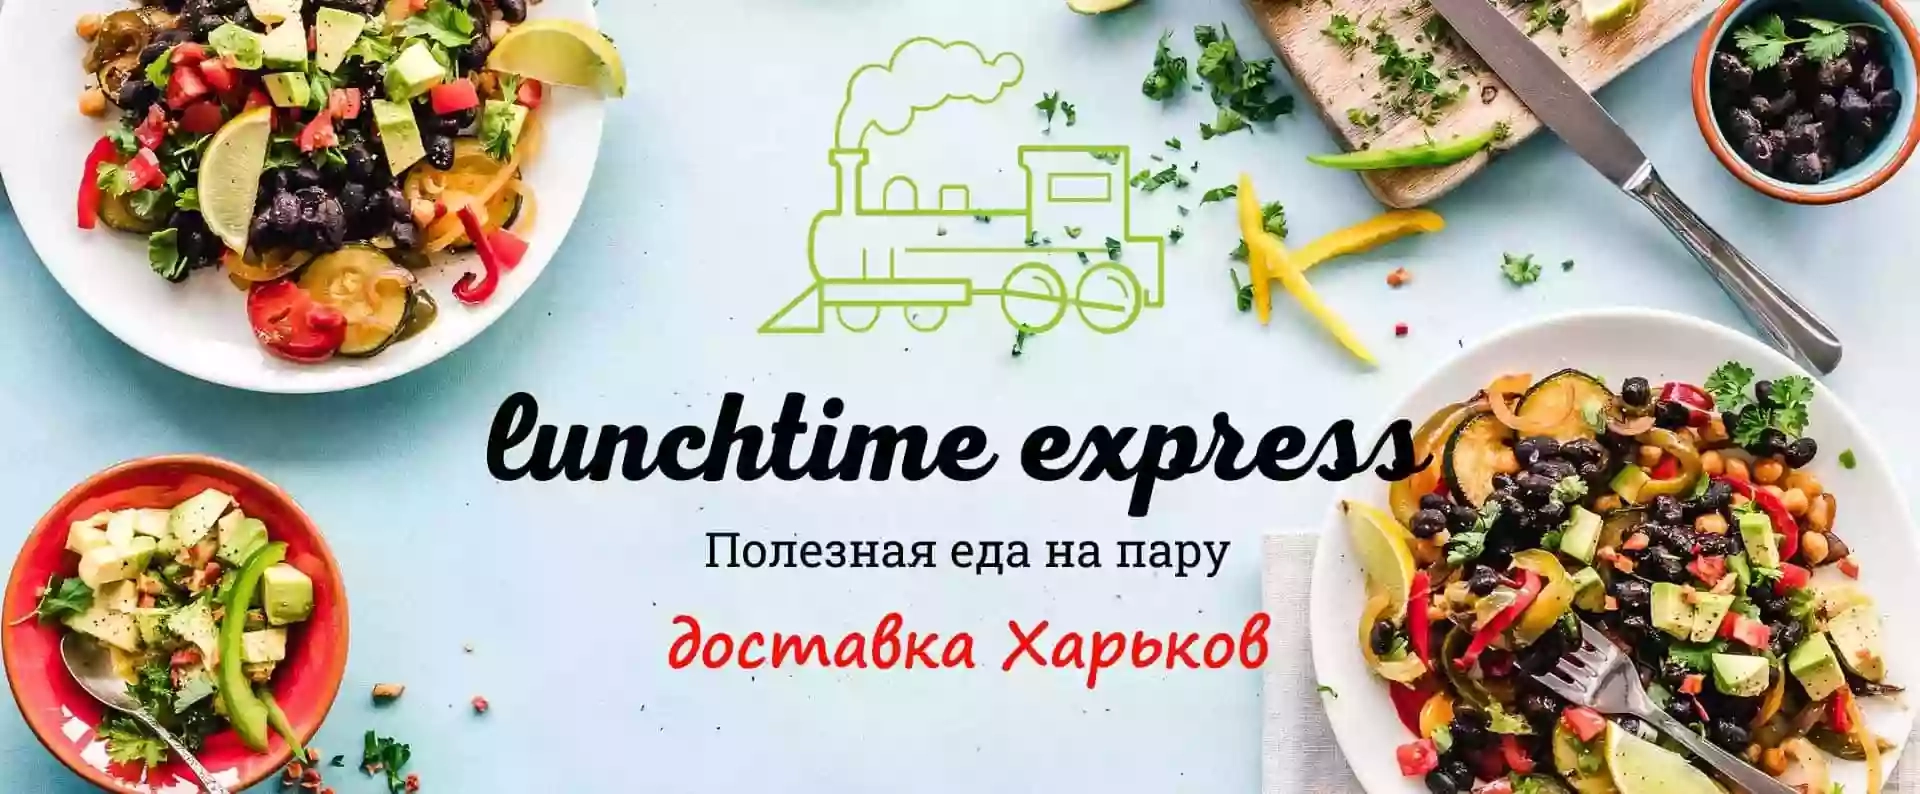 Lunchtime express - паровая еда, доставка.